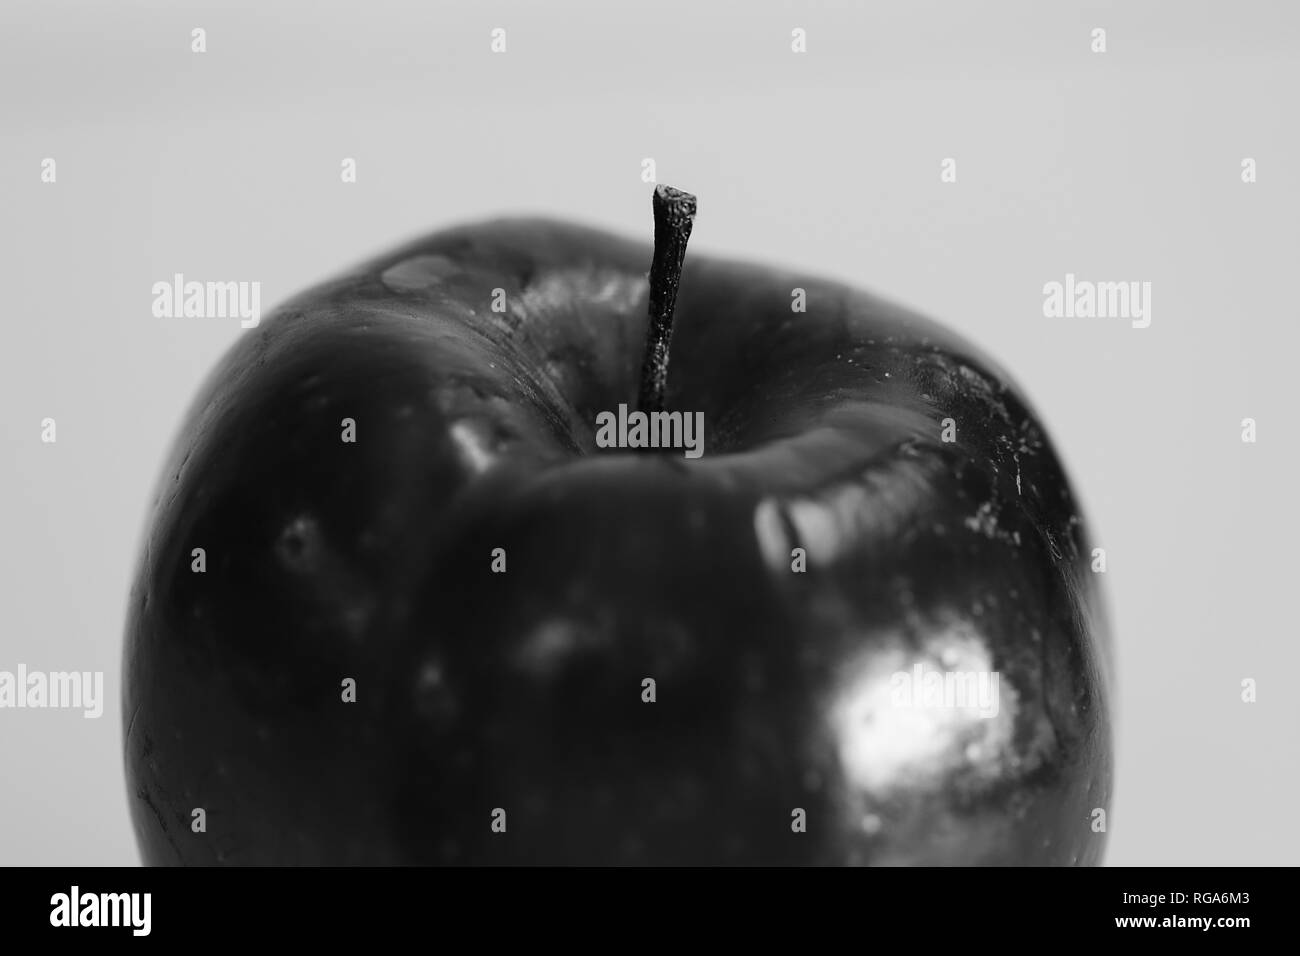 Macro photo of a Red Delicious apple. Beautiful closeup shows the details of this fruit. Black and white photo. Stock Photo